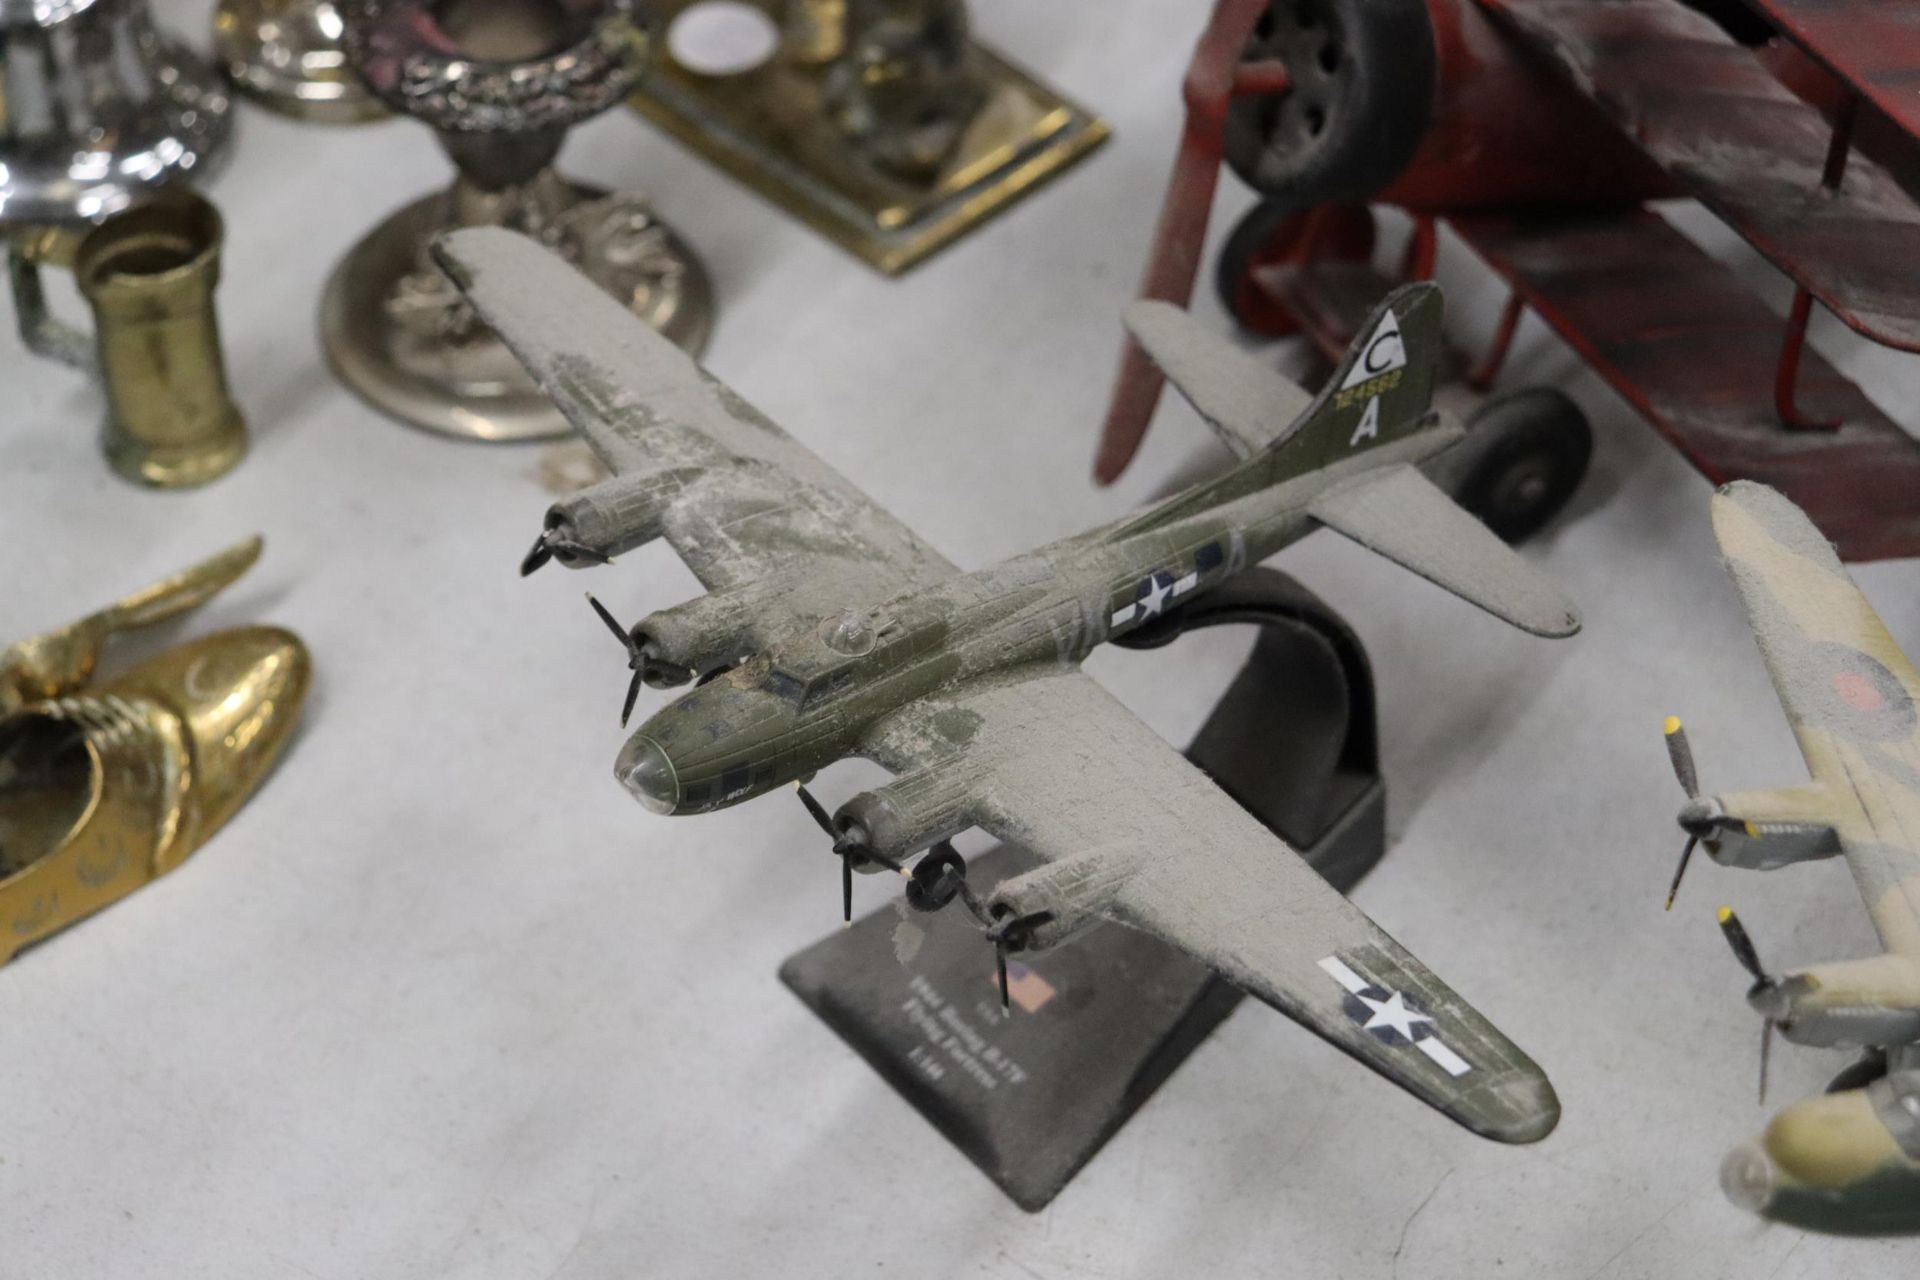 FOUR AEROPLANE MODELS TO INCLUDE TWO TIN PLATE PLUS AN AVRO LANCASTER AND A 1944 BOEING B-17F FLYING - Image 3 of 10